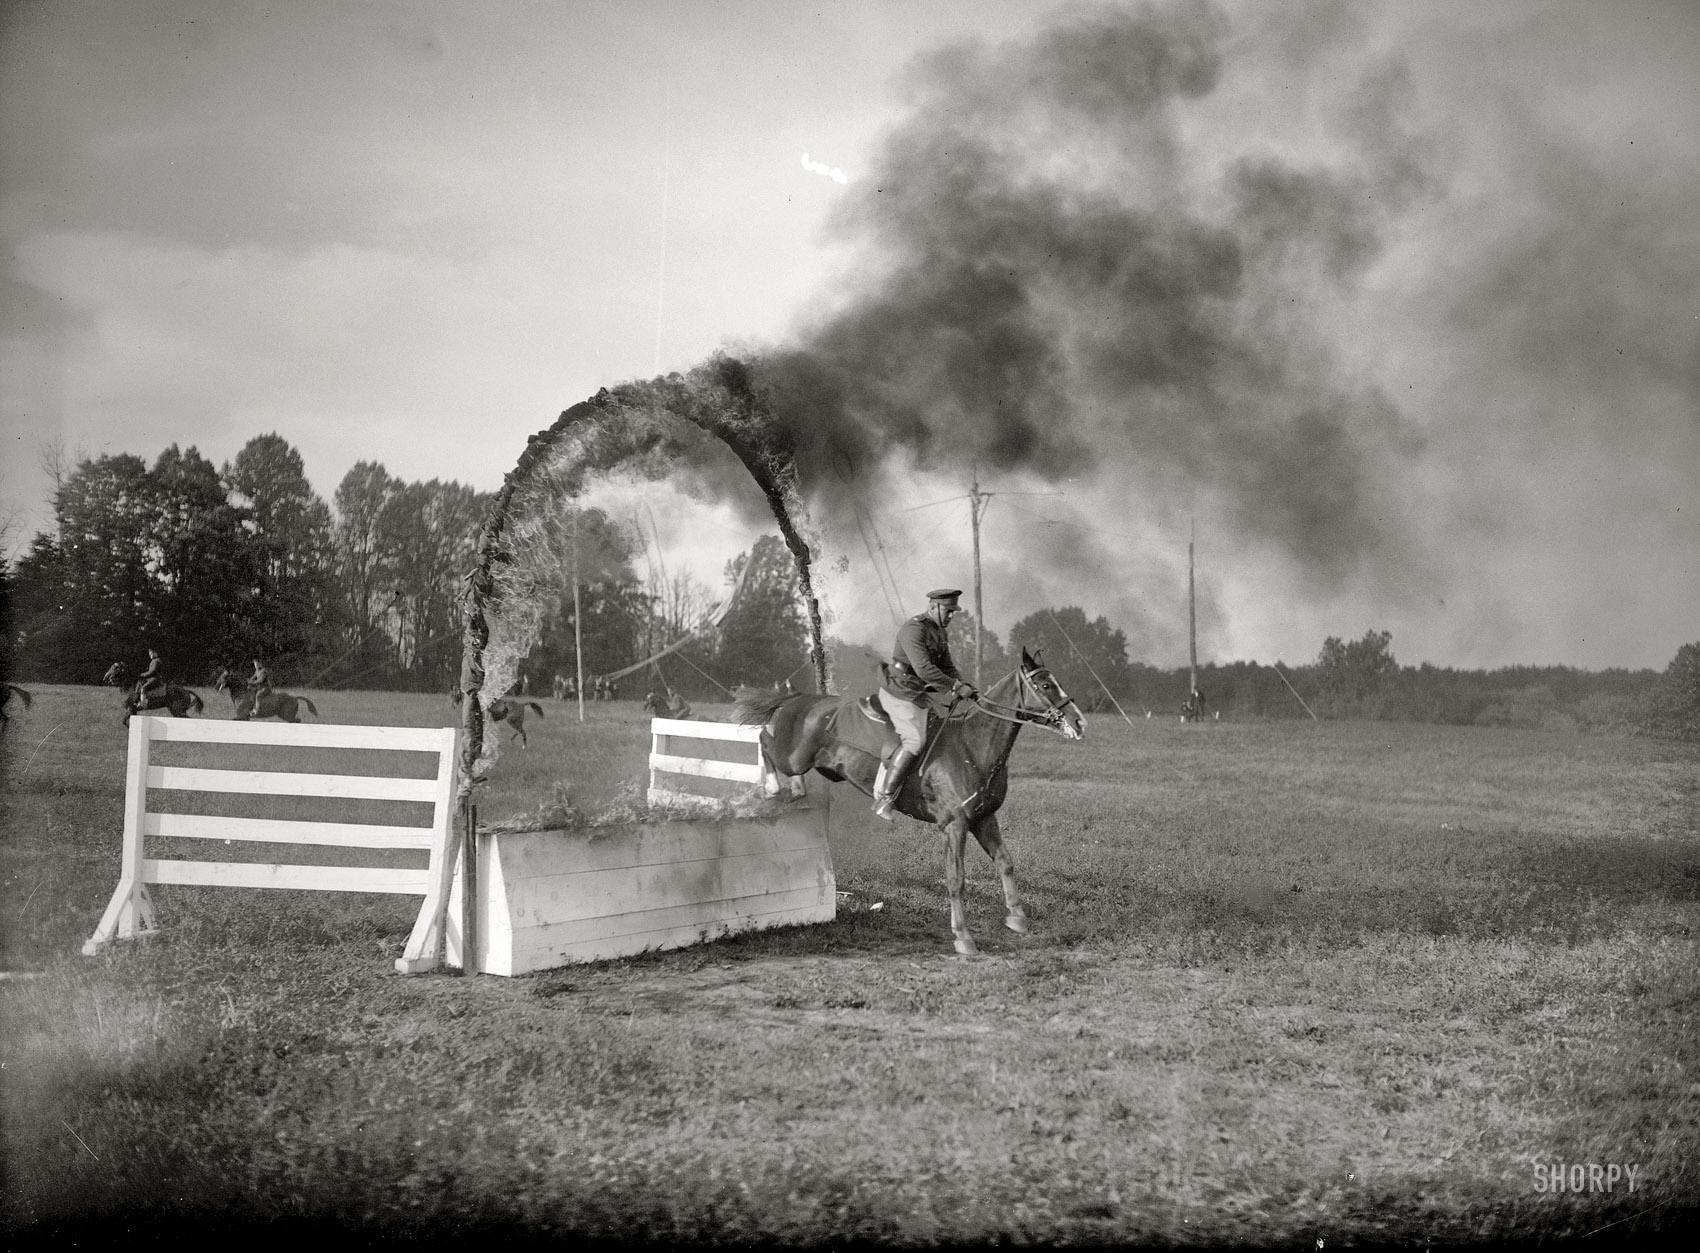 Washington, D.C. "Shrine barbecue, October 21, 1922." A few more passes for medium-rare. National Photo Company Collection glass negative. View full size.